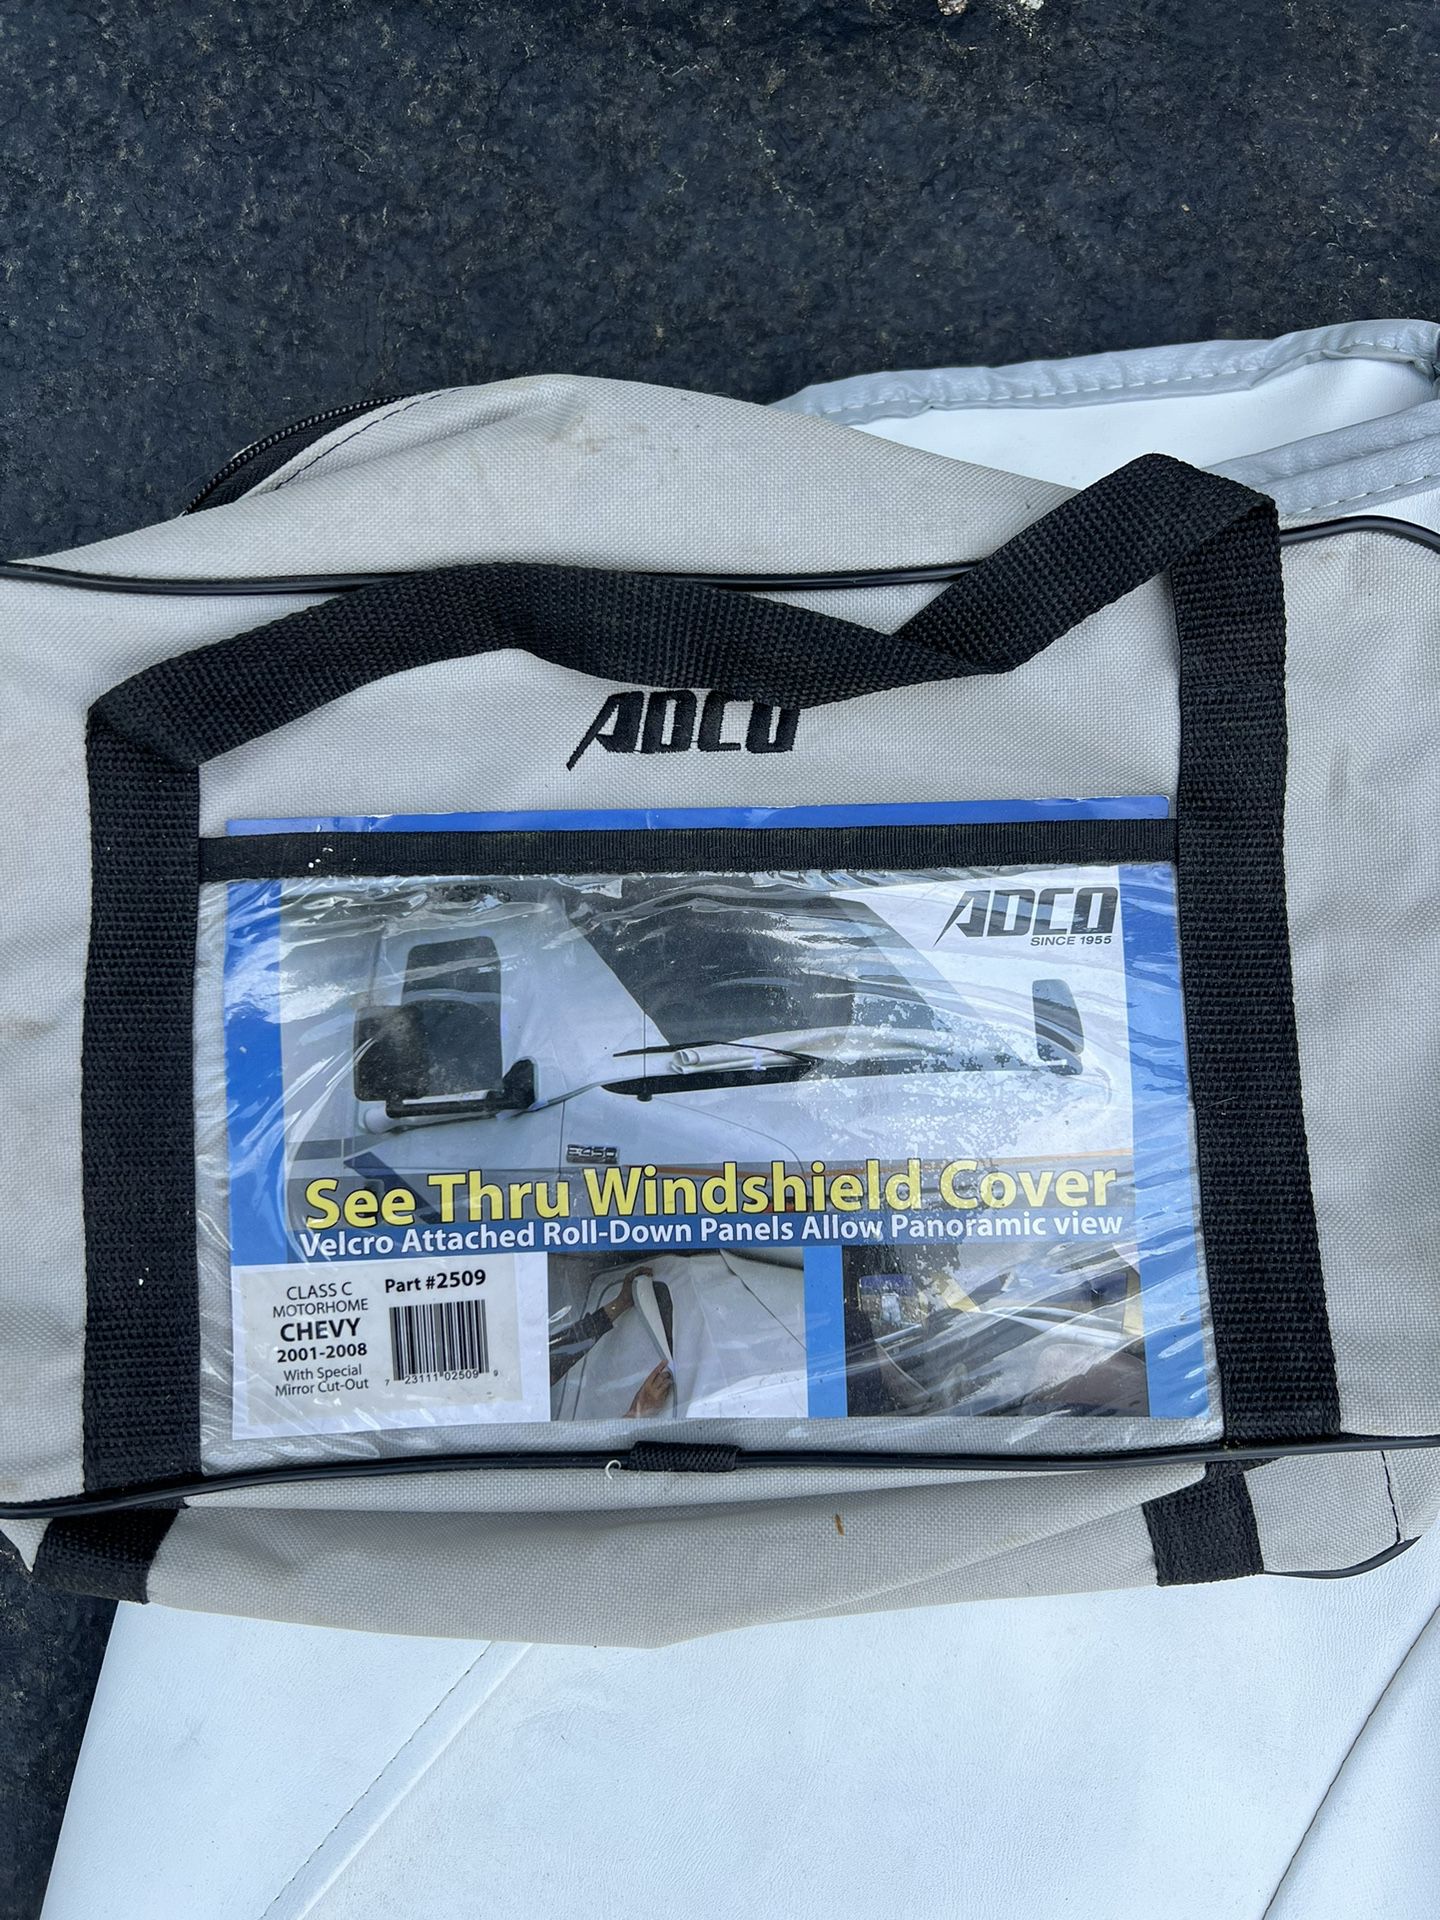 Adcco Class C Windshield Cover